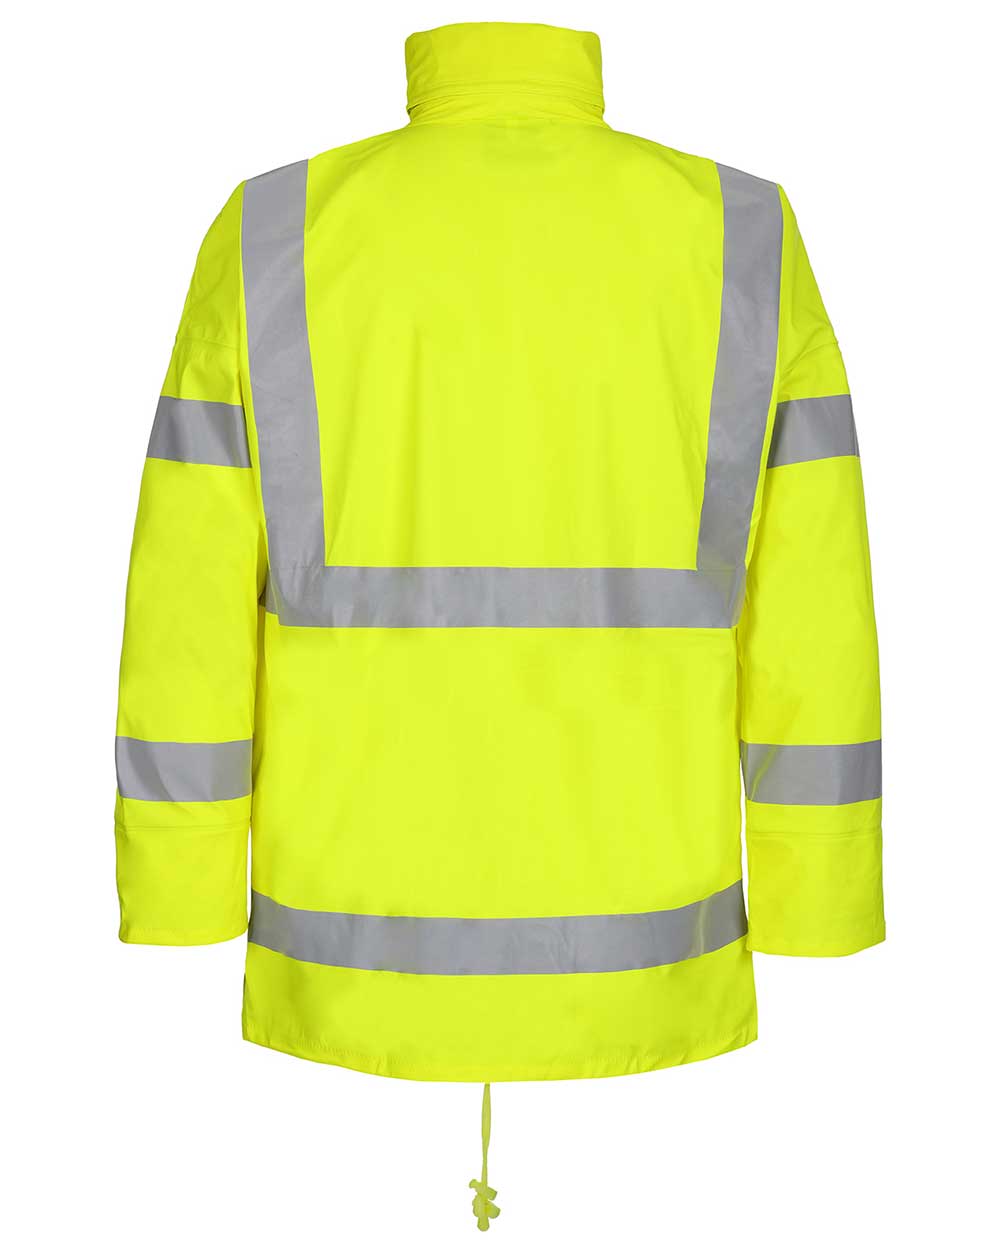 Back view Fort Air Reflex Waterproof Hi-vis Jacket in yellow with reflective strips